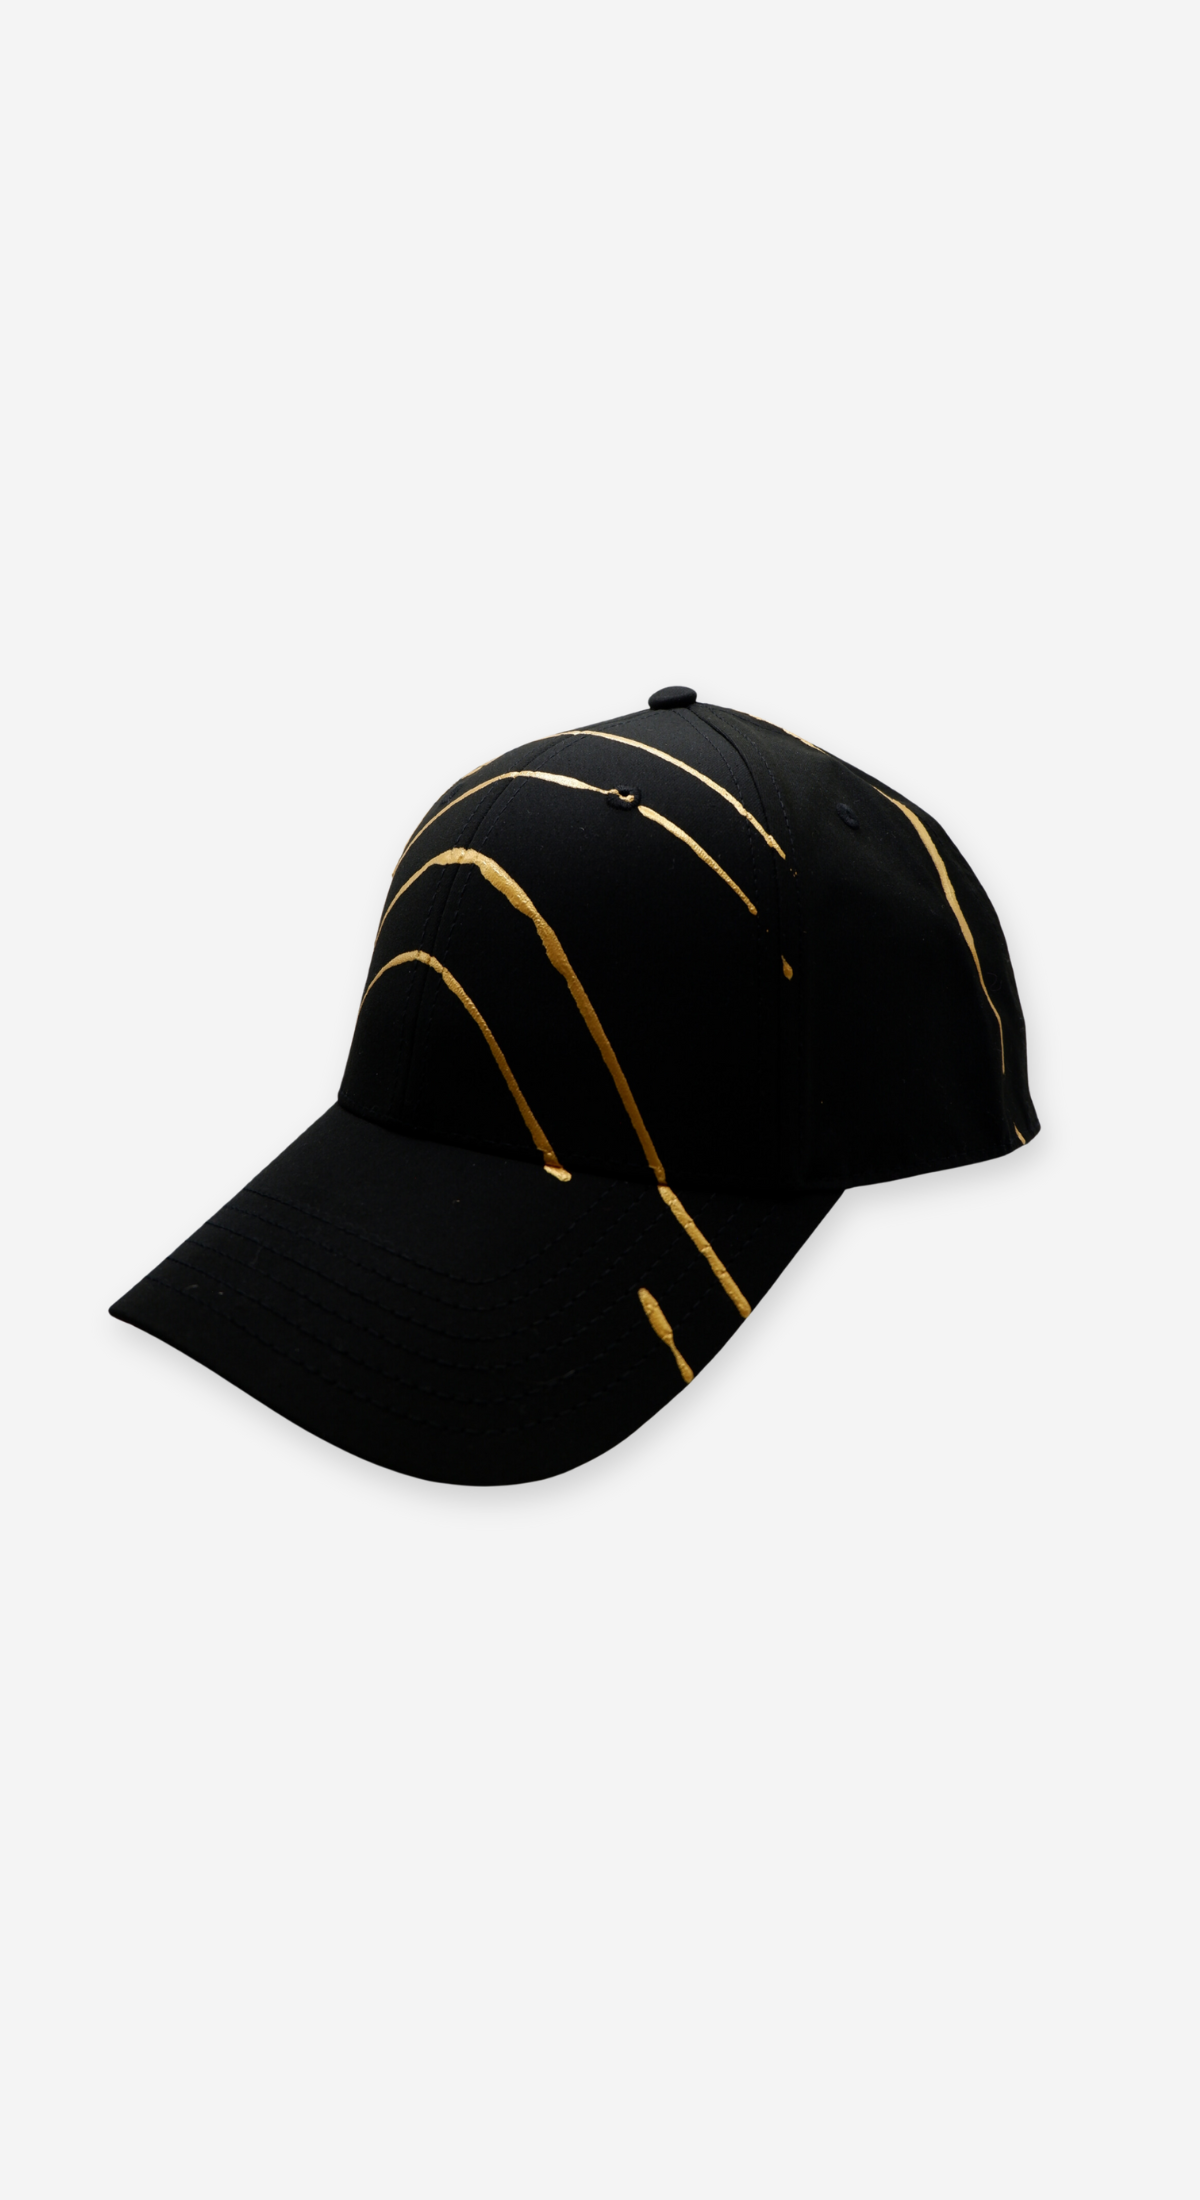 Hand-Painted Abstract Art Black Hat with Gold